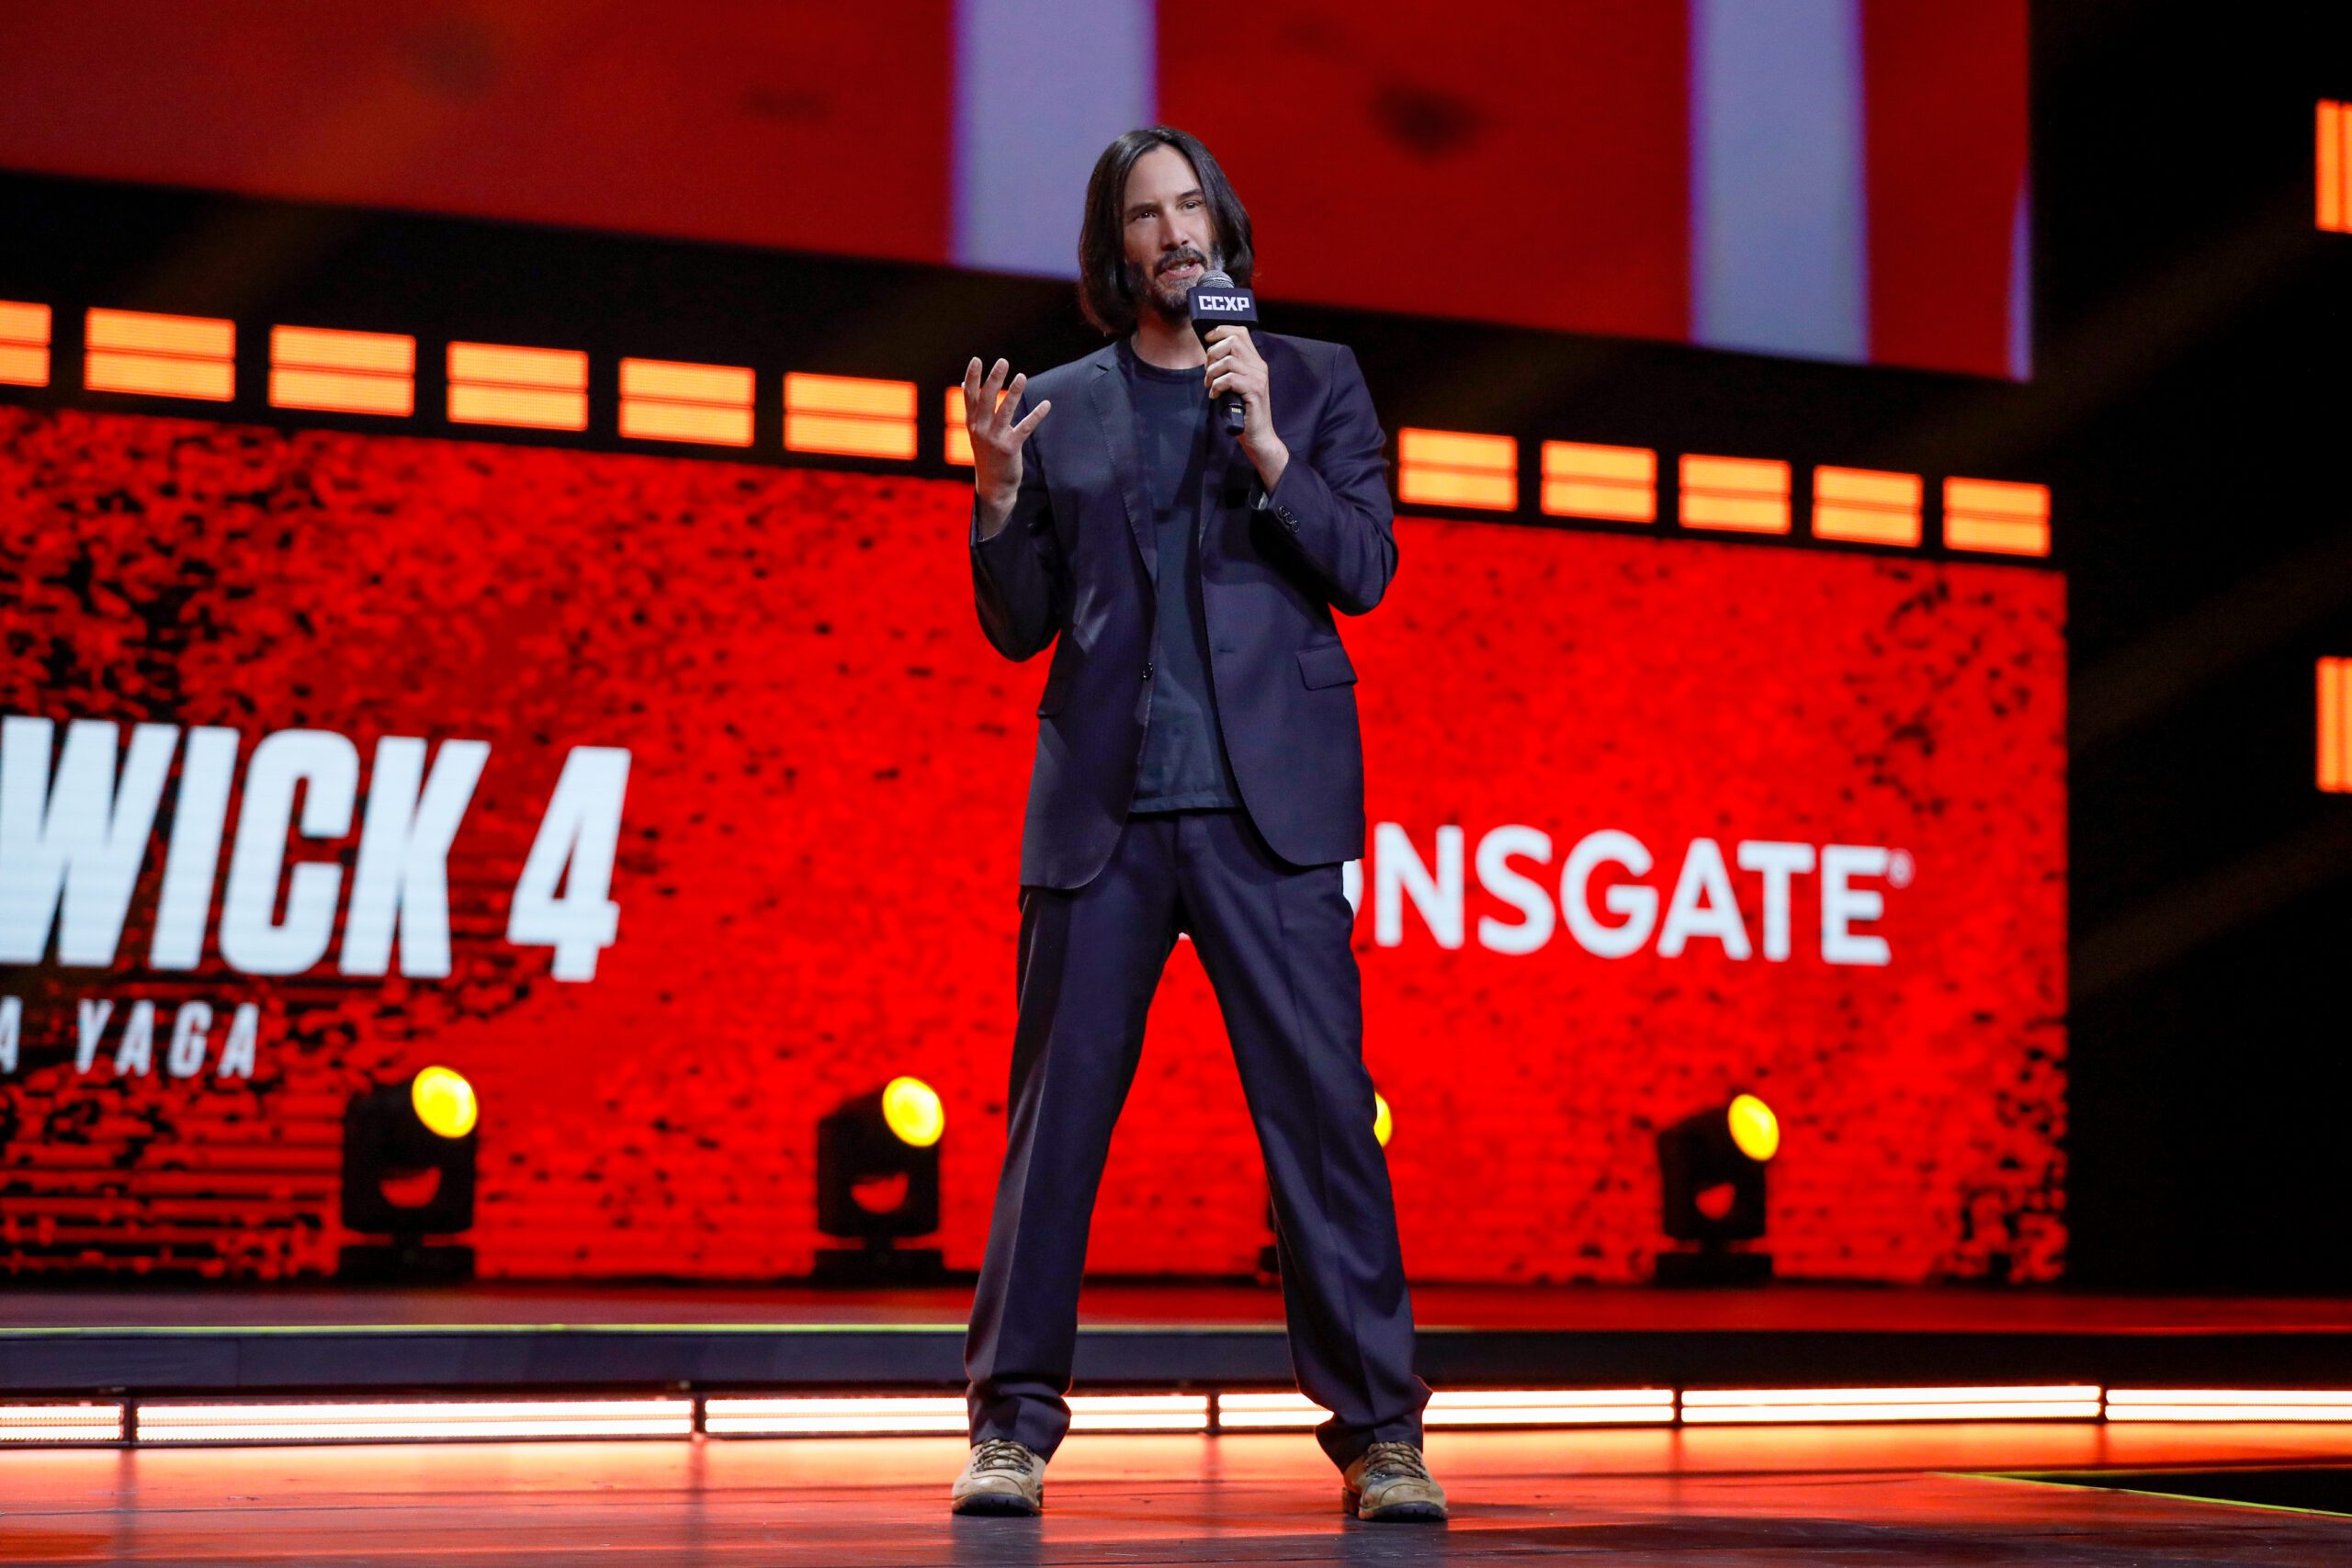 SAO PAULO, BRAZIL - DECEMBER 03: Keanu Reeves speaks during a panel of John Wick 4 at the Thunder Stage at Sao Paulo Expo on December 03, 2022 in Sao Paulo, Brazil. (Photo by Ricardo Moreira/Getty Images for Lionsgate)